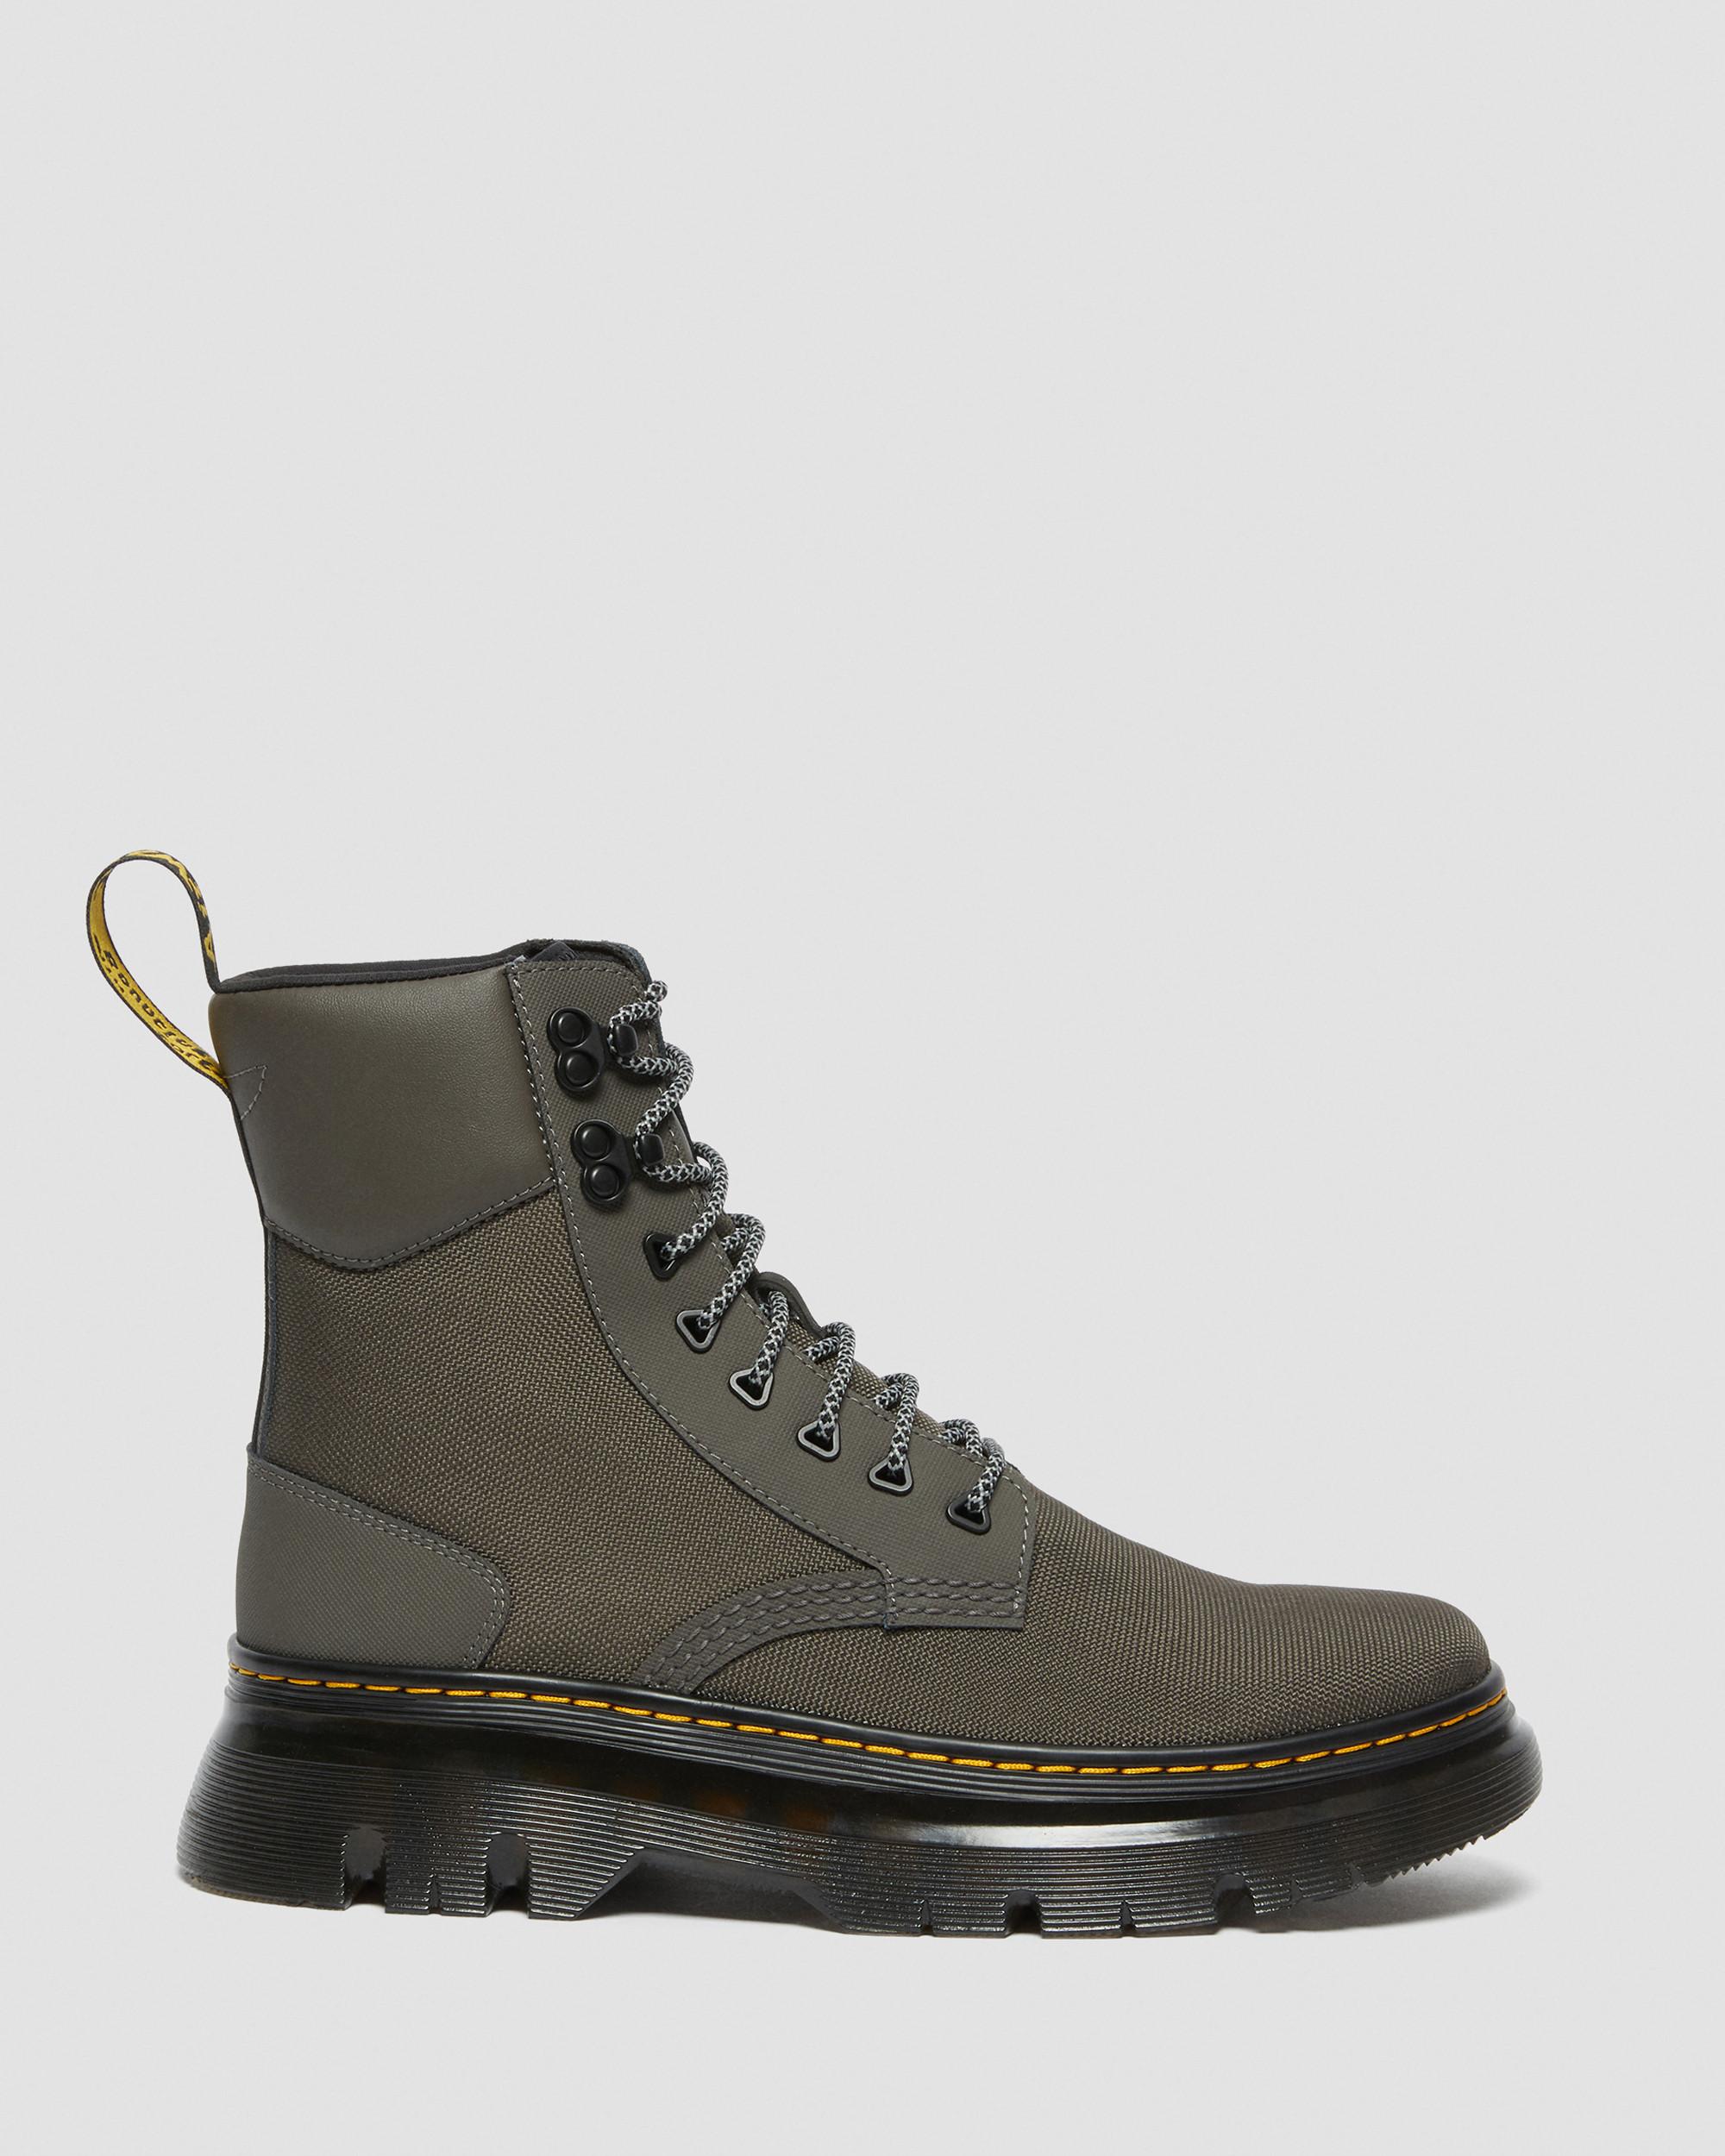 Are Dr. Marten Boots True To Size?, LMents of Style